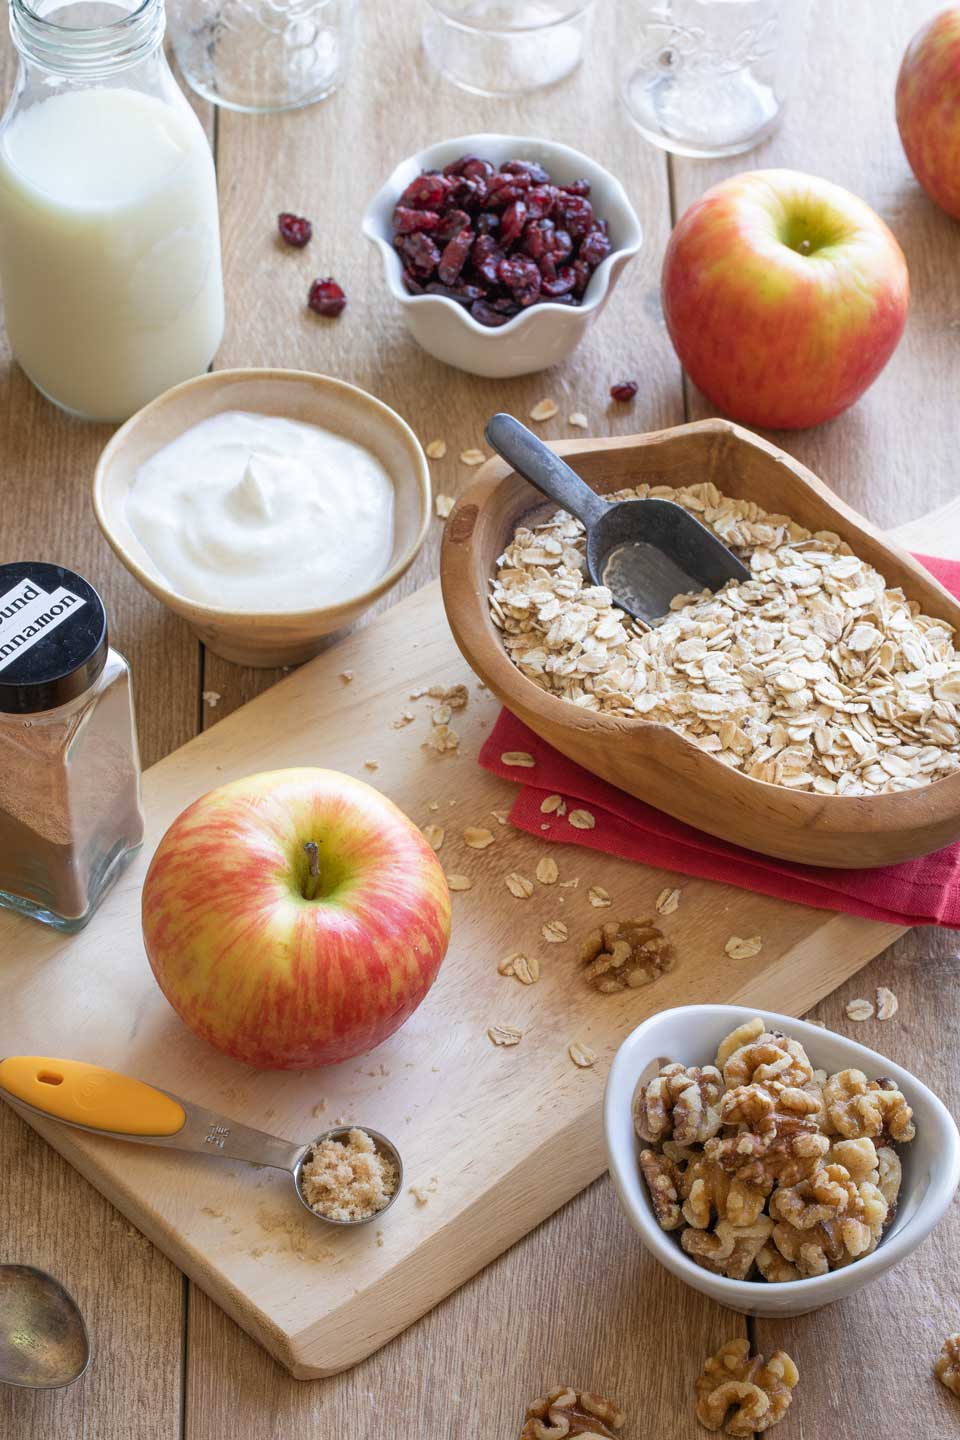 Recipe ingredients like apple oats walnuts milk and cinnamon, in various little bowls on a cutting board.